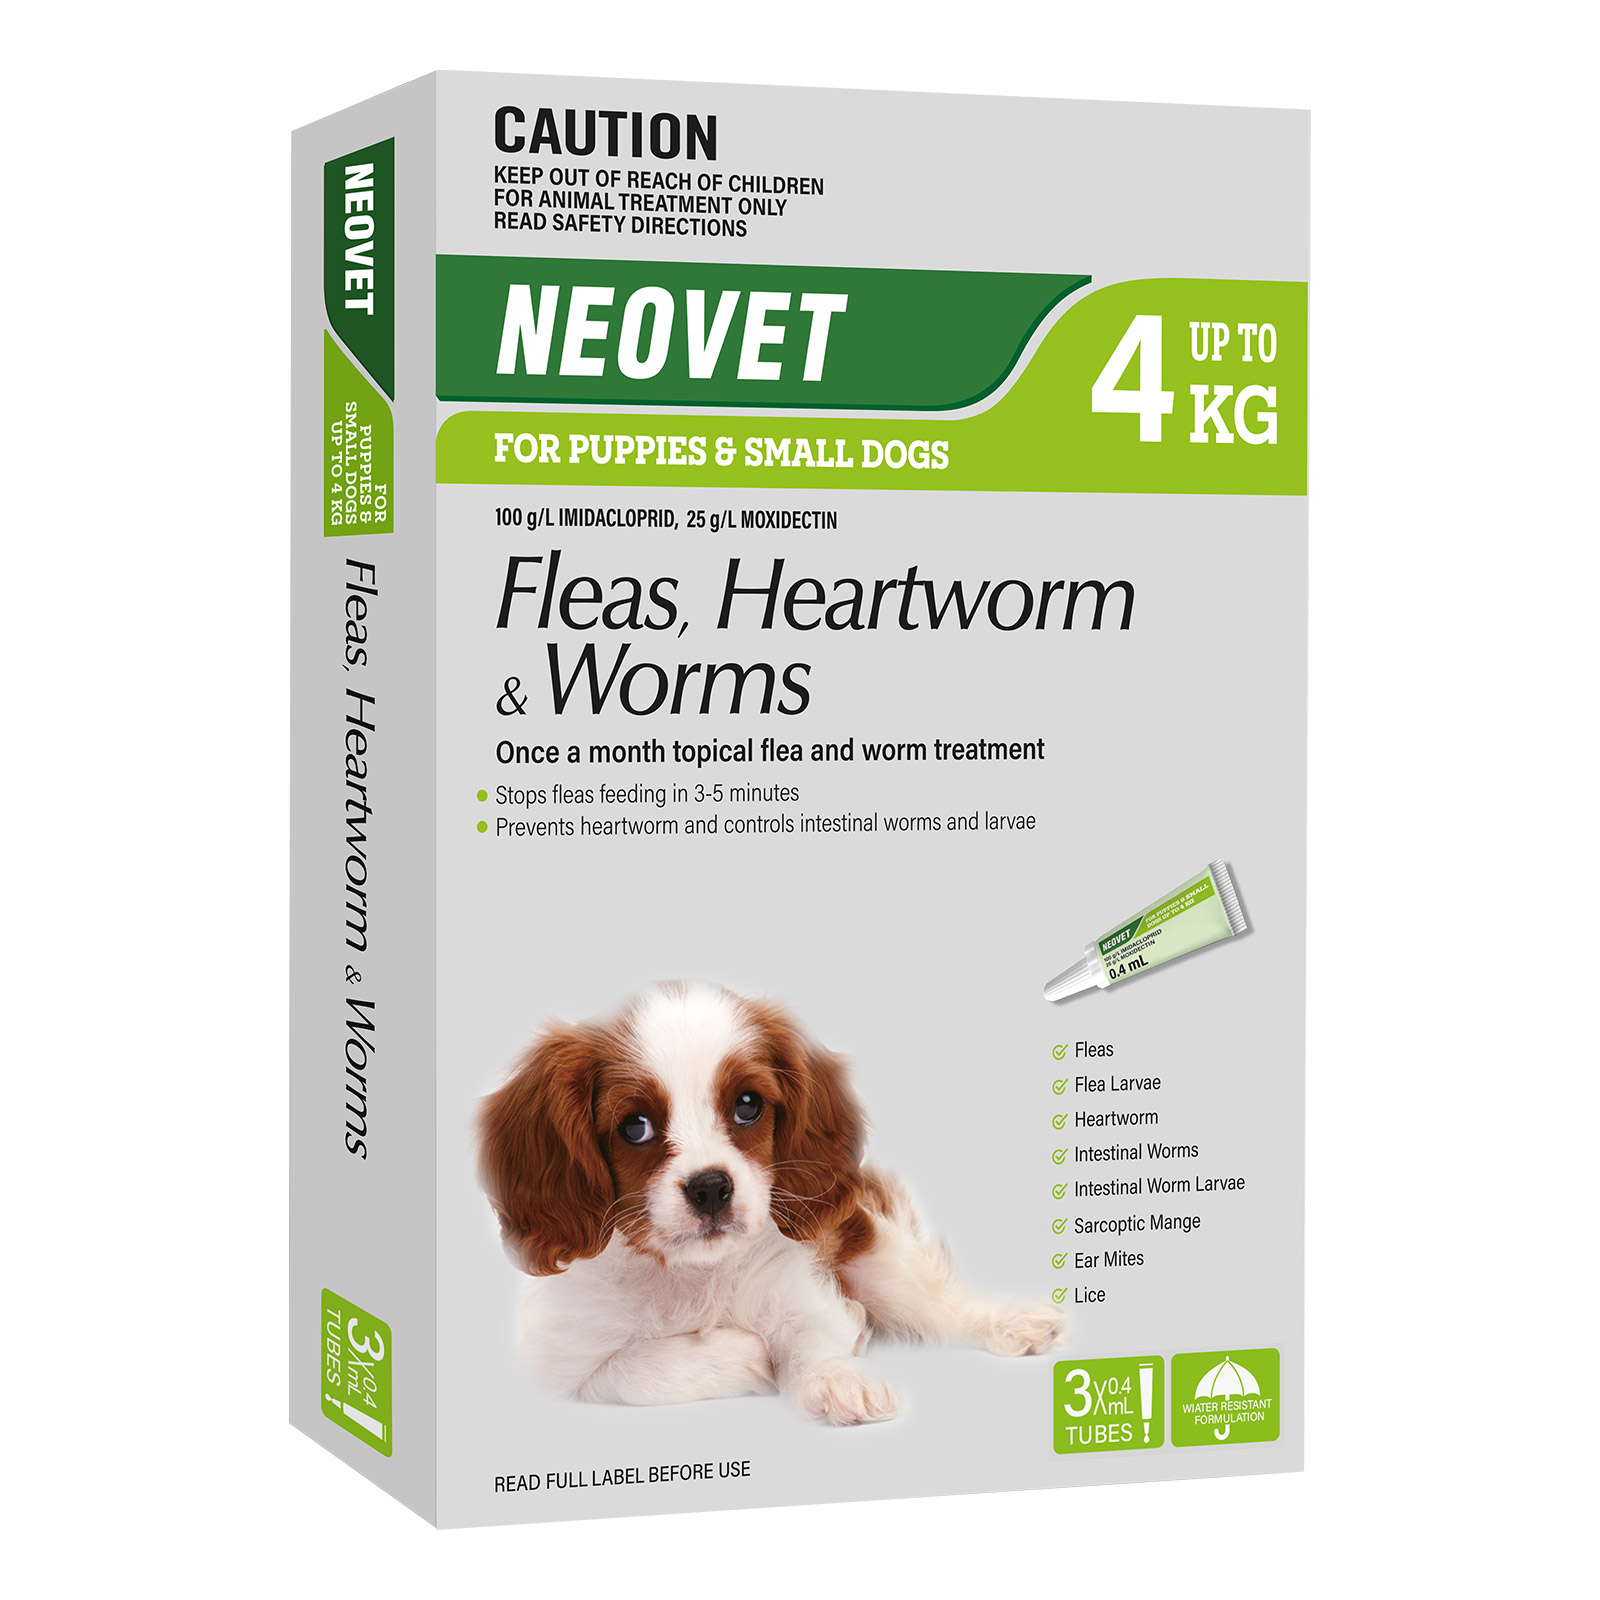 Neovet Spot-On For Puppies And Small Dogs Upto 8.8lbs (Green) 3 Pipettes
